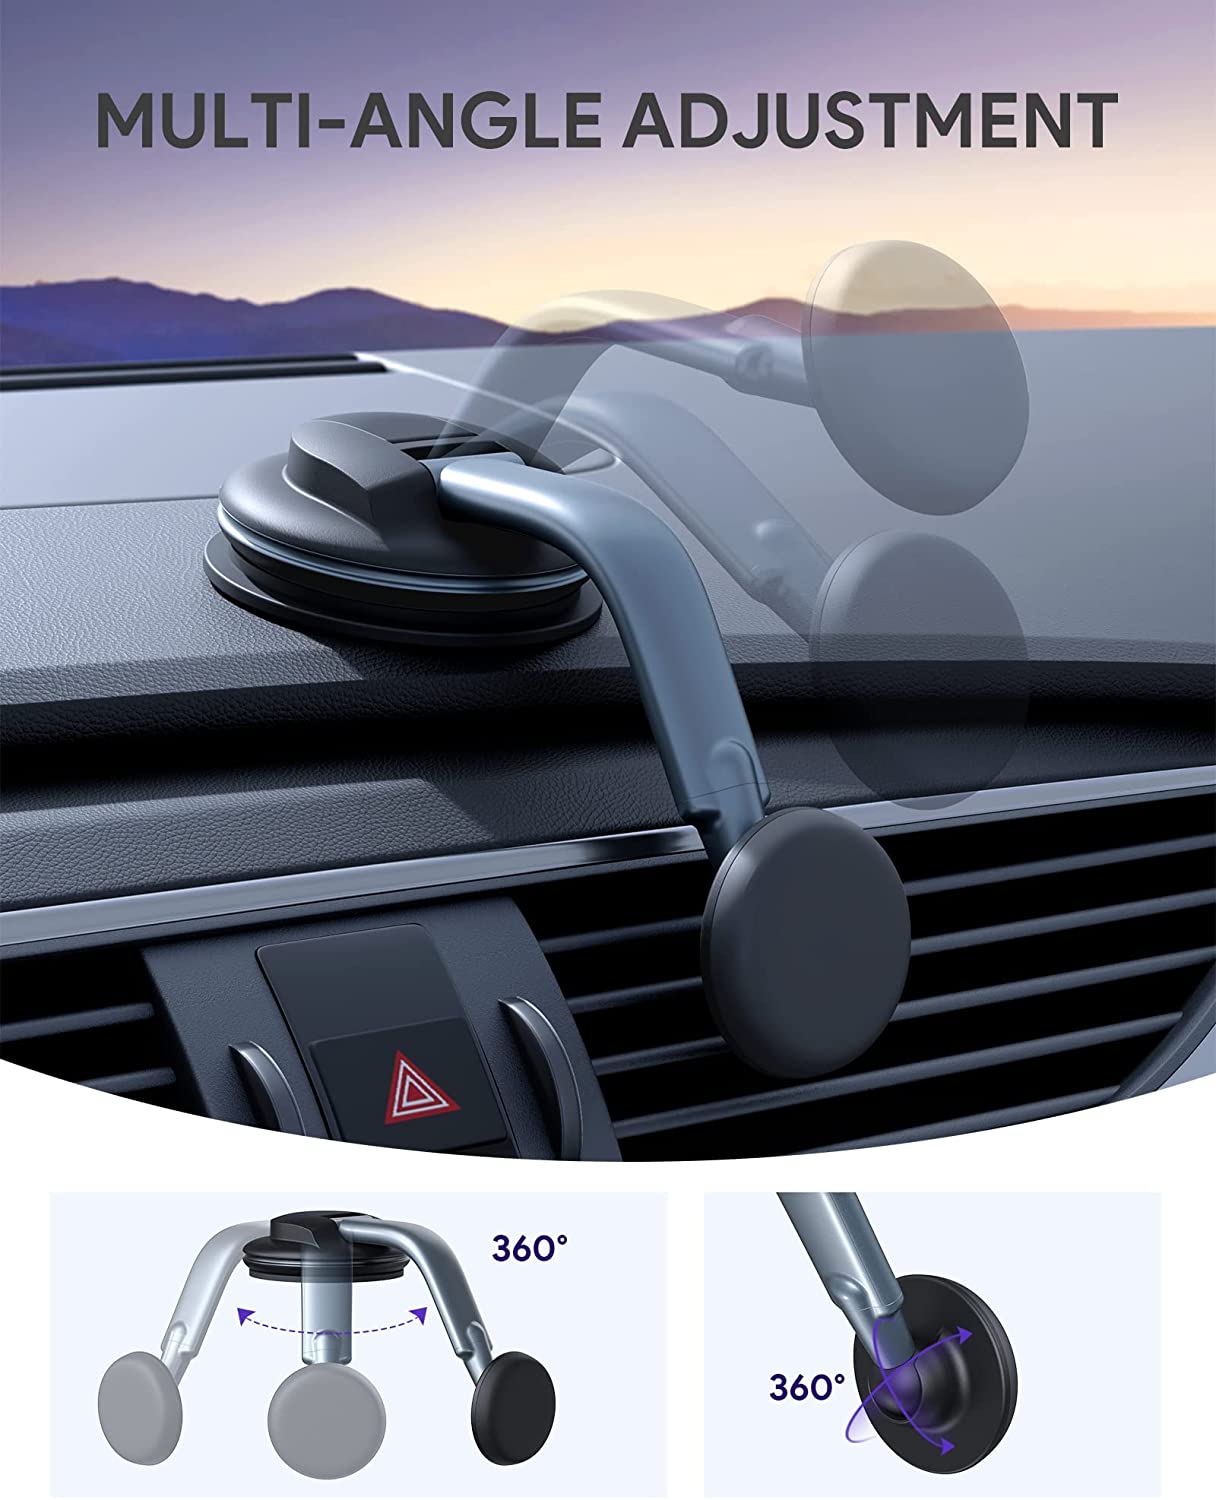 Magnetic Phone Holder Dashboard Windshield Upgraded Suction Cup